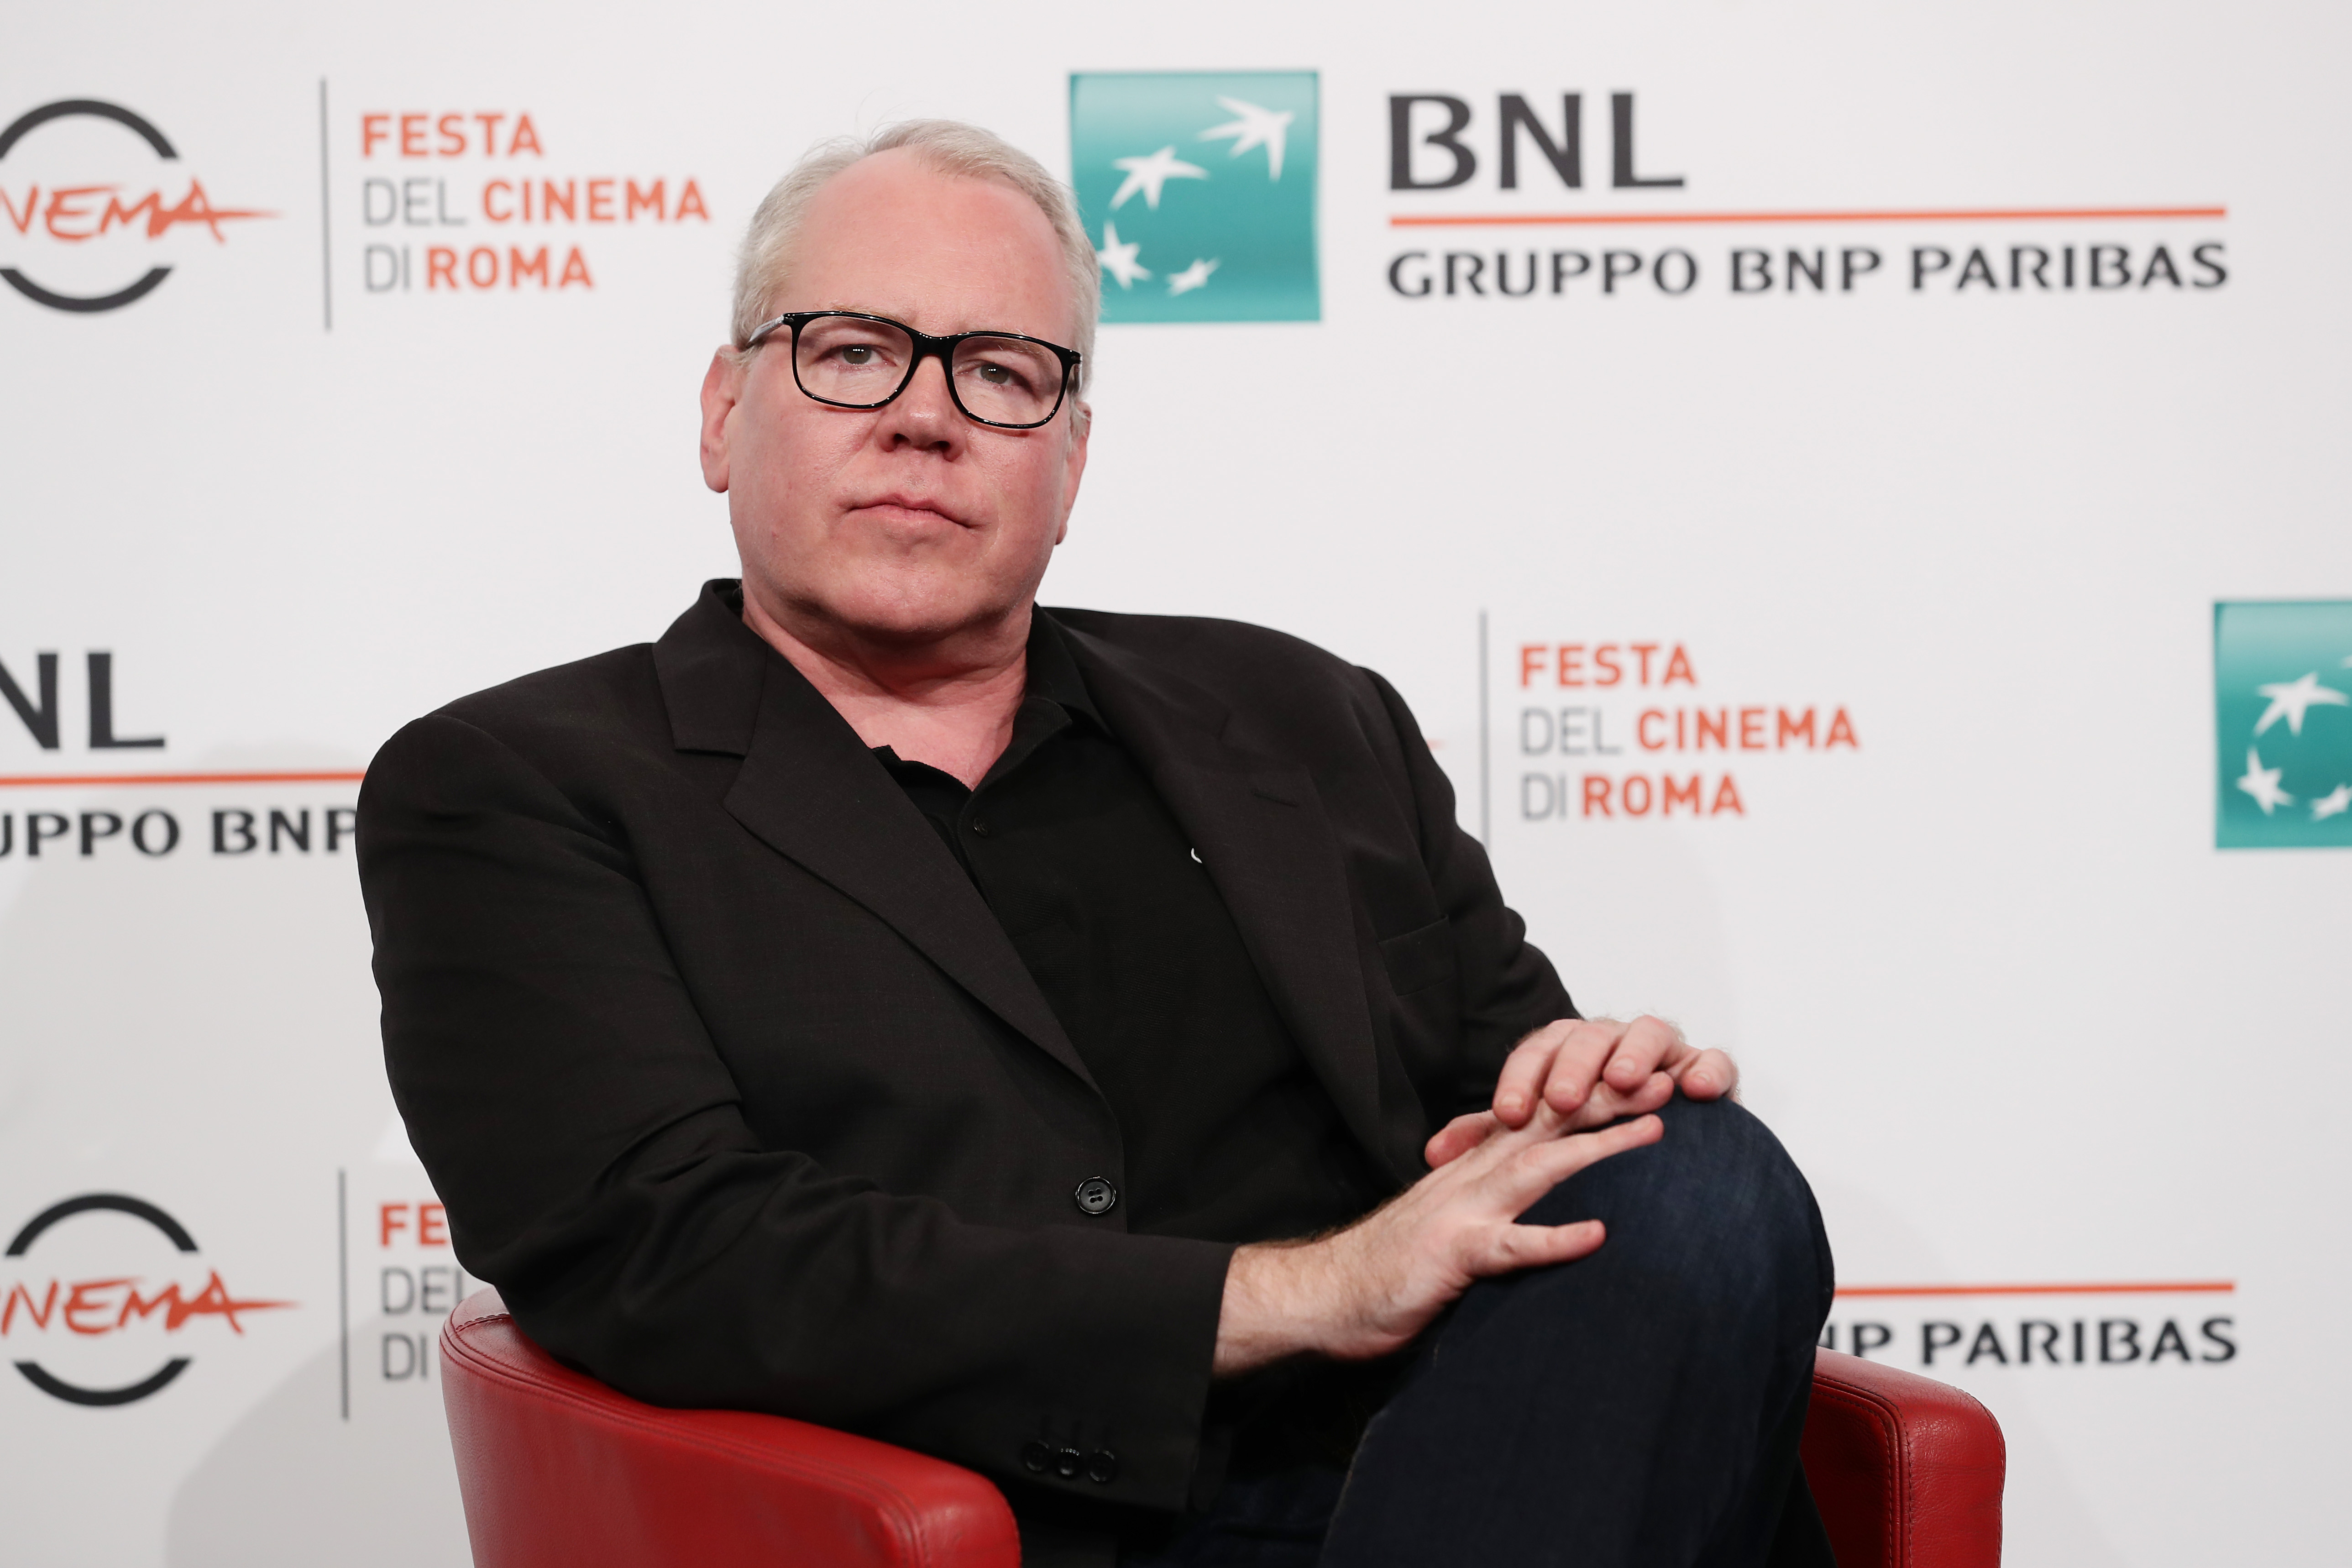 Bret Easton Ellis during the 14th Rome Film Festival on October 20, 2019 in Rome, Italy. (Photo by Vittorio Zunino Celotto/Getty Images for RFF)